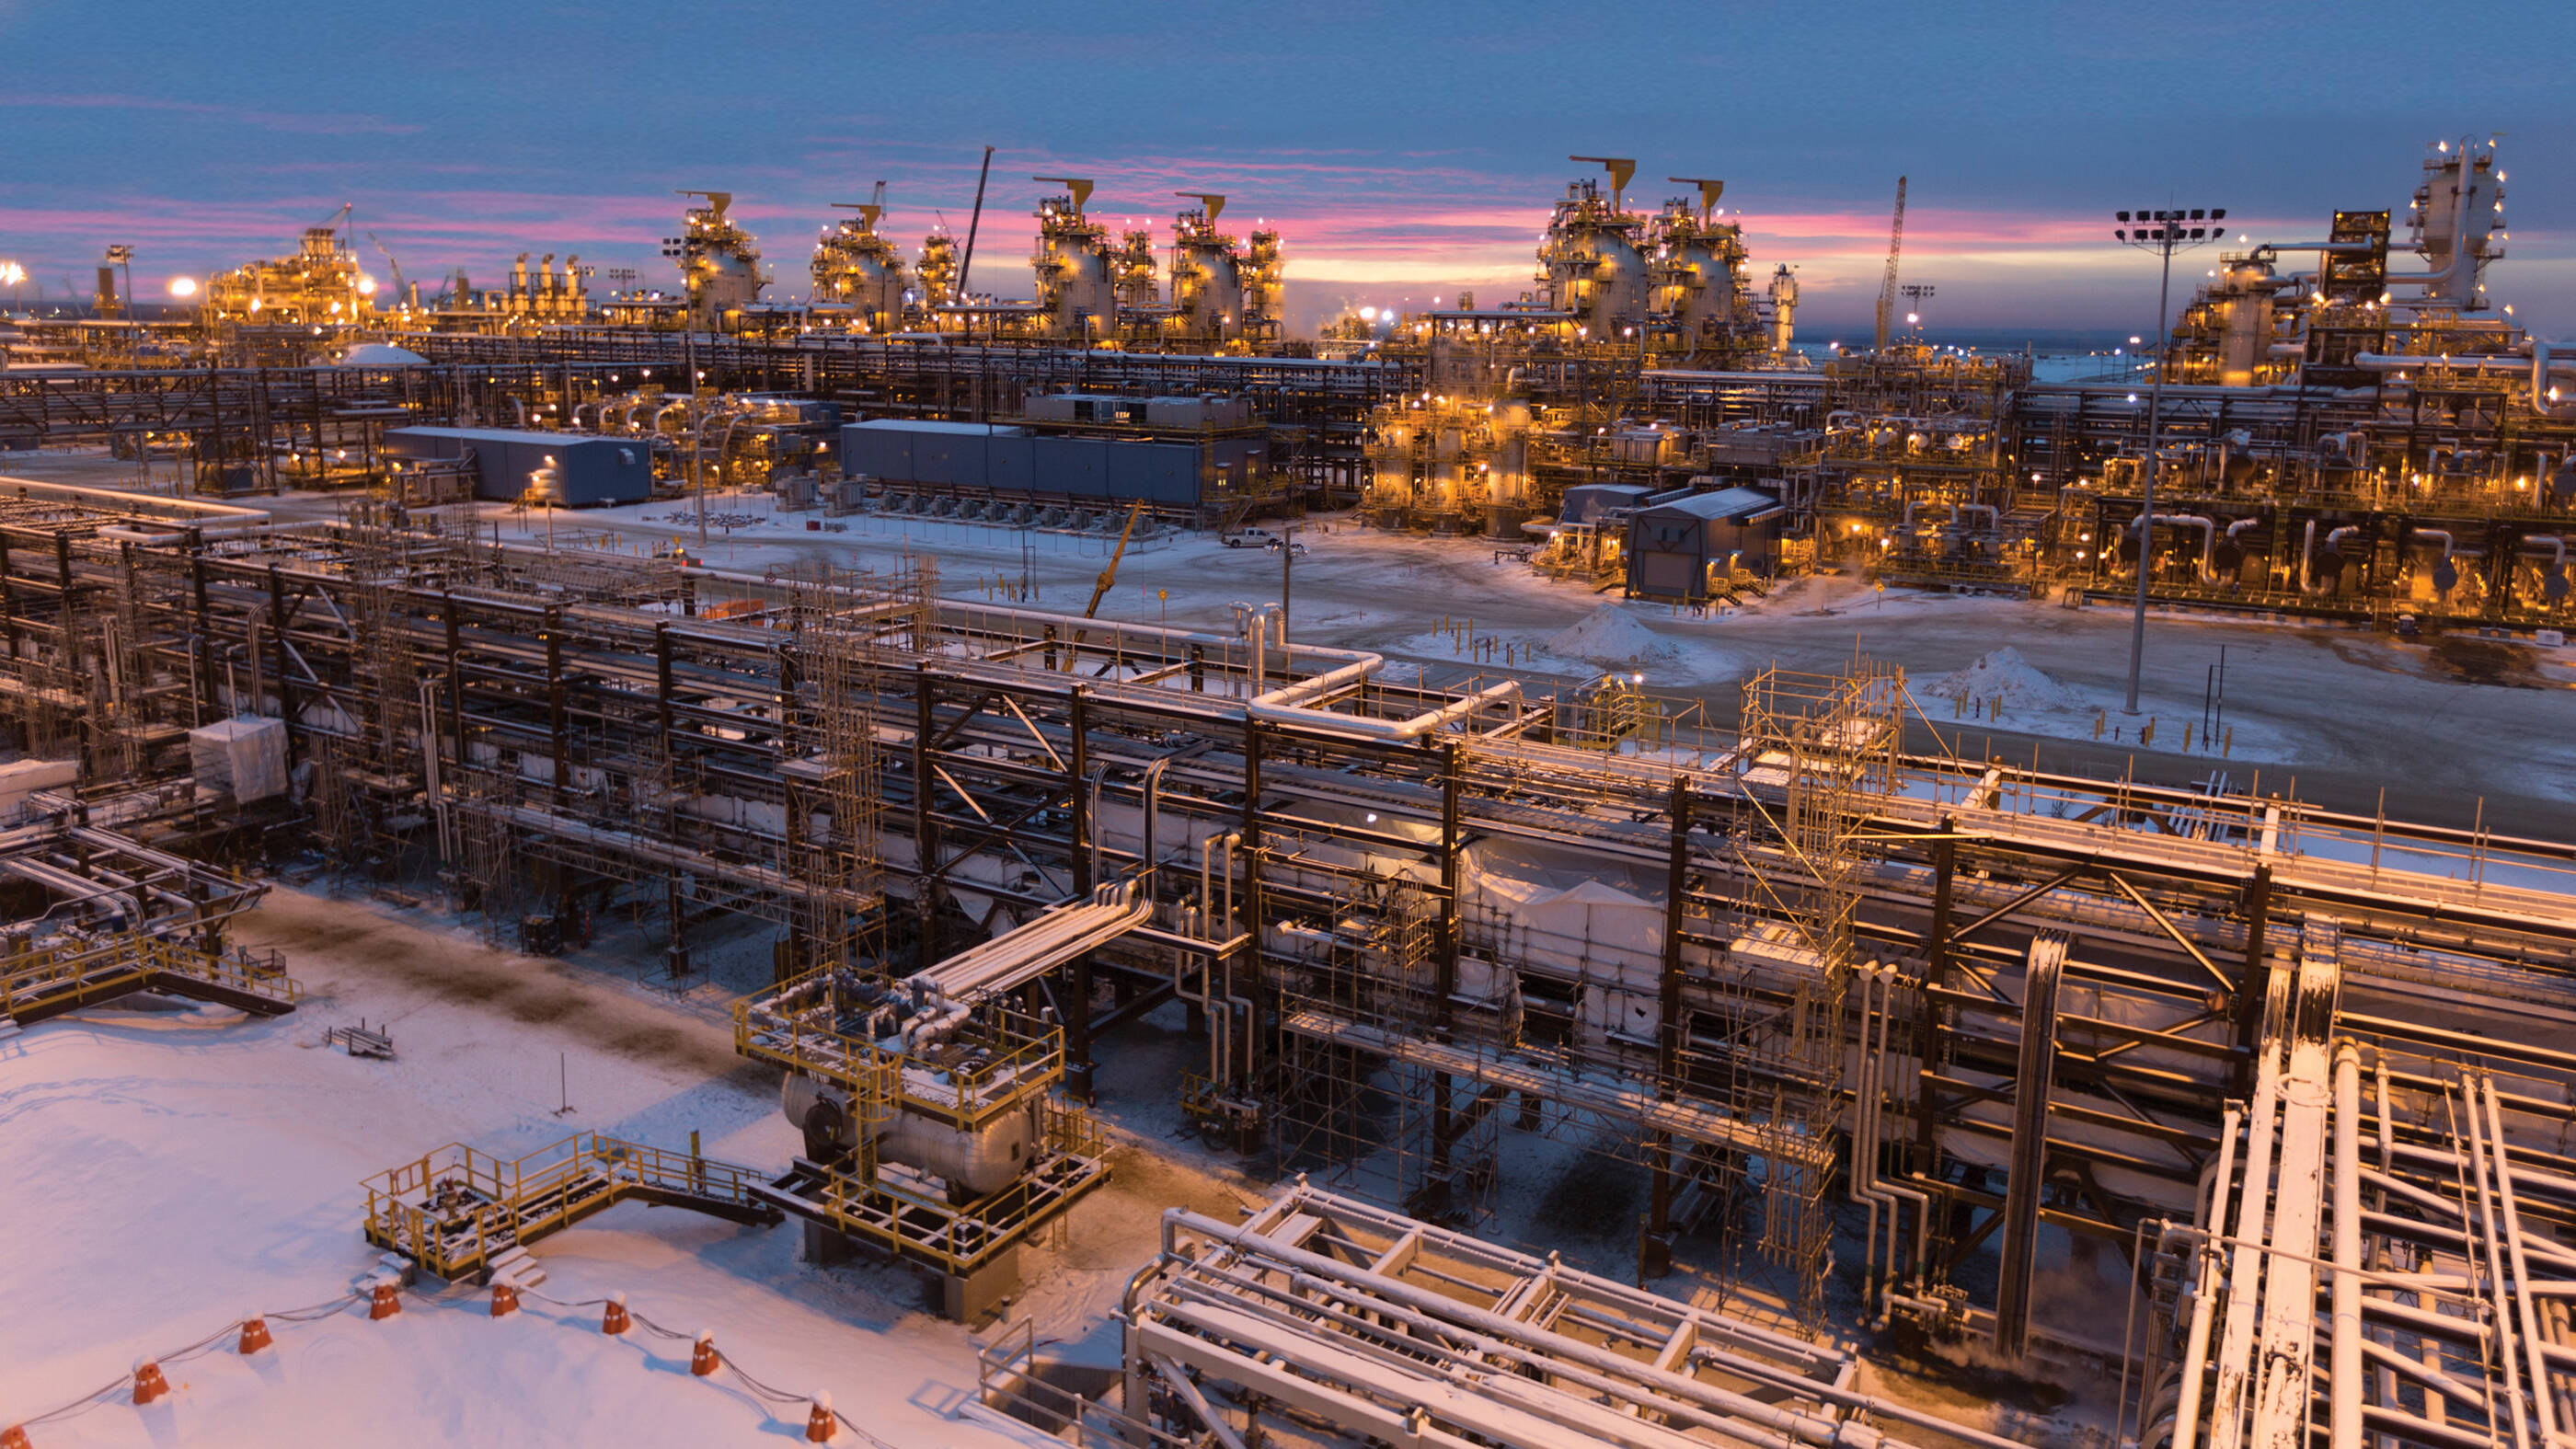 Imperial announces the start-up of the initial development of the Kearl oil sands project.